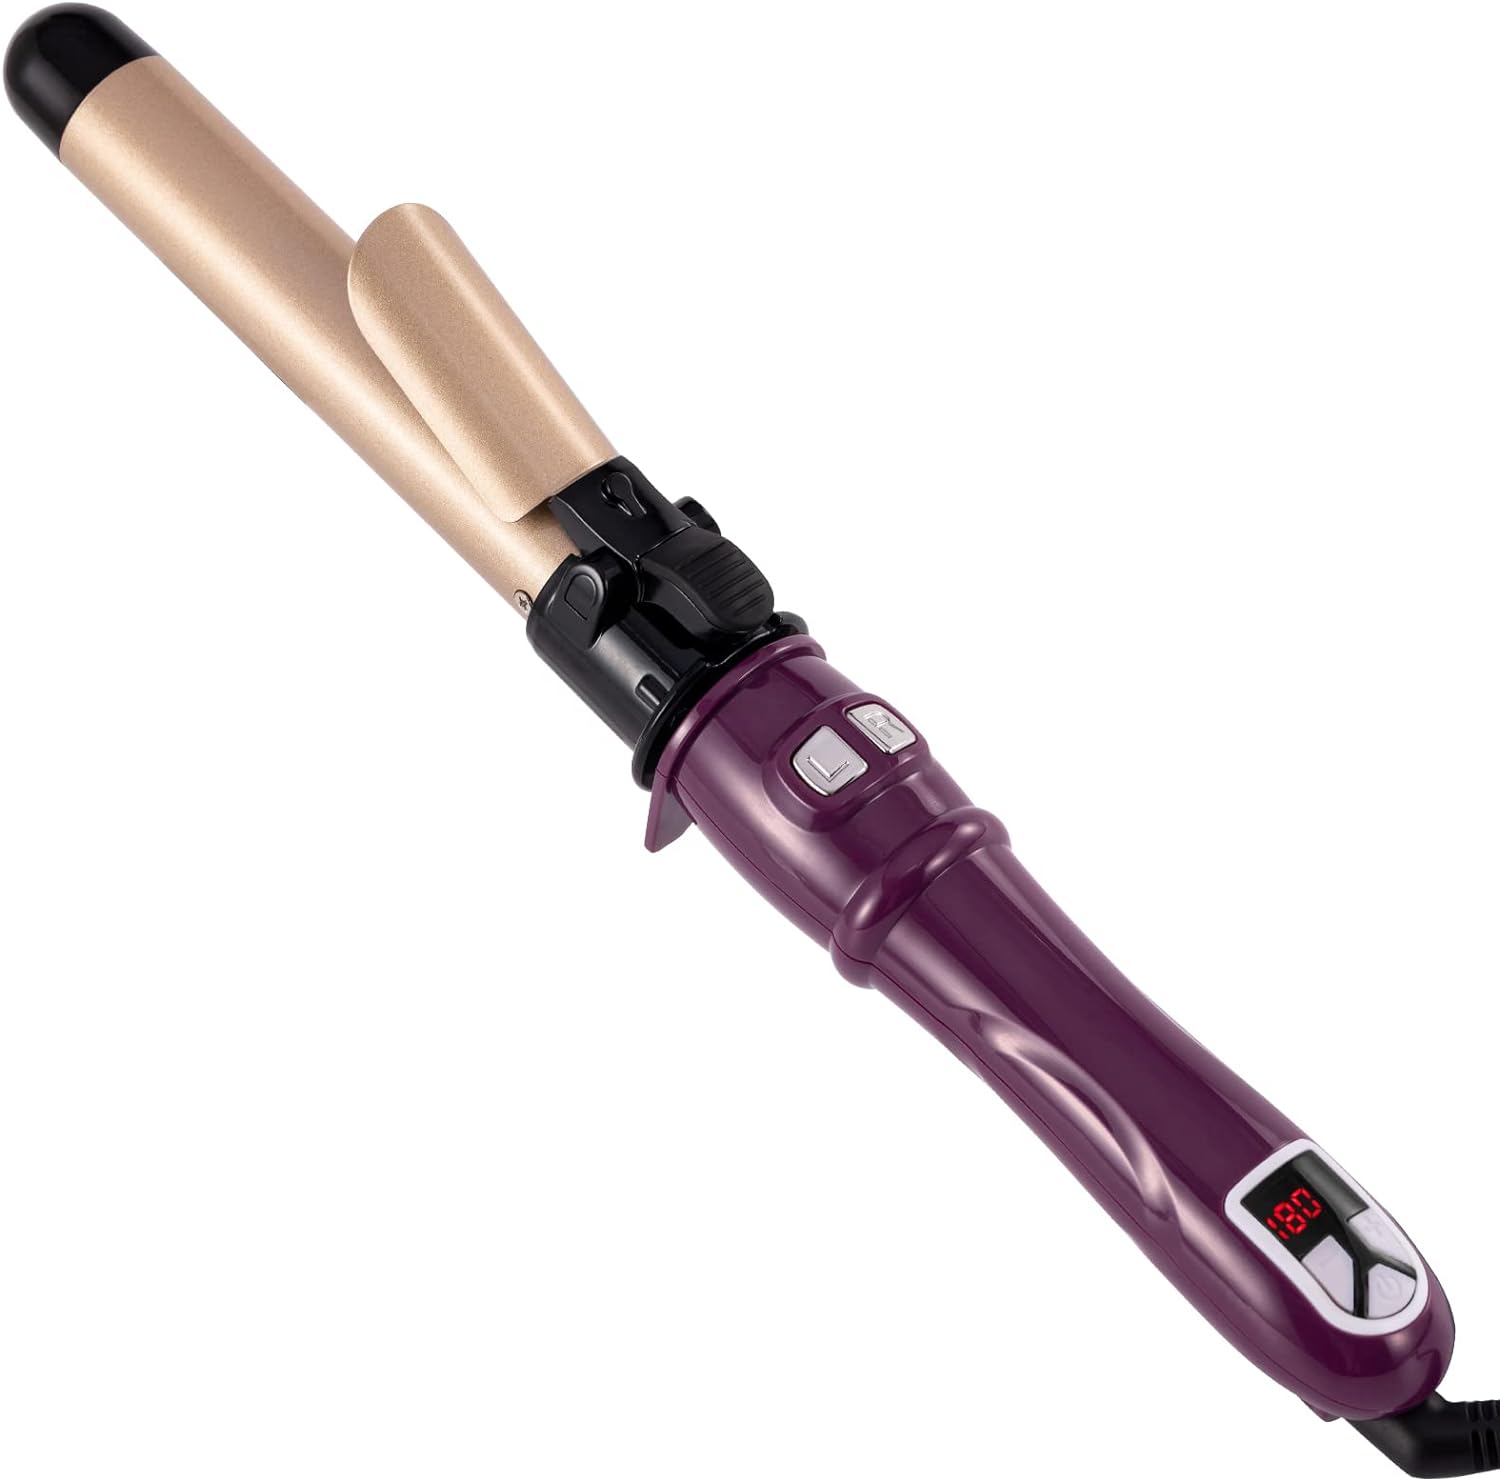 Automatic Curling Iron Wand, Rotating Hair Curler for Long Hair, Auto Hair Styling Curler Dual Voltage Ceramic Tourmaline Curling Iron 1.1inch